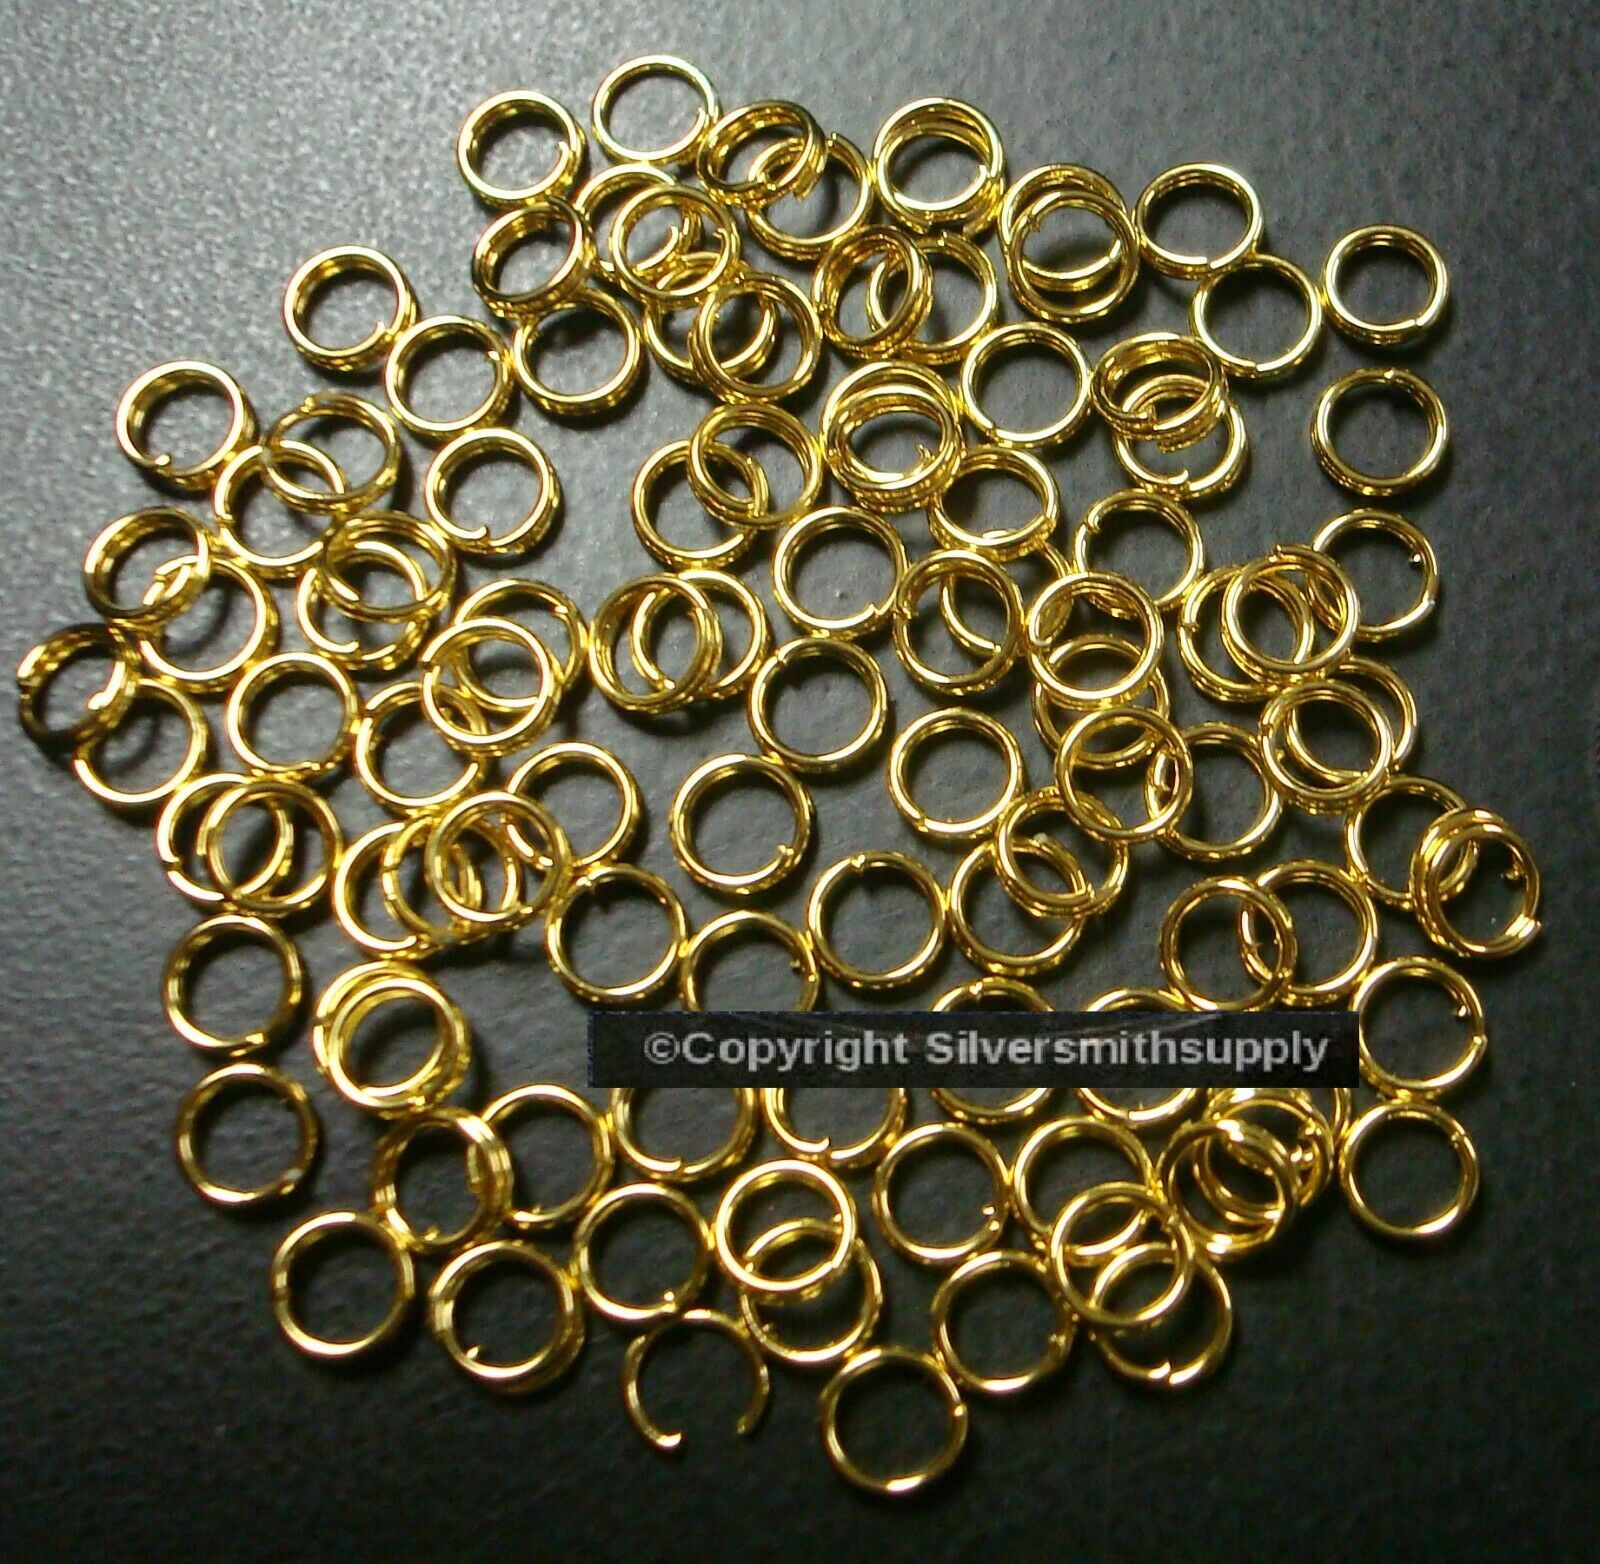 5mm Gold plated split rings jump rings 100pcs beading bails charm attach FPC006C